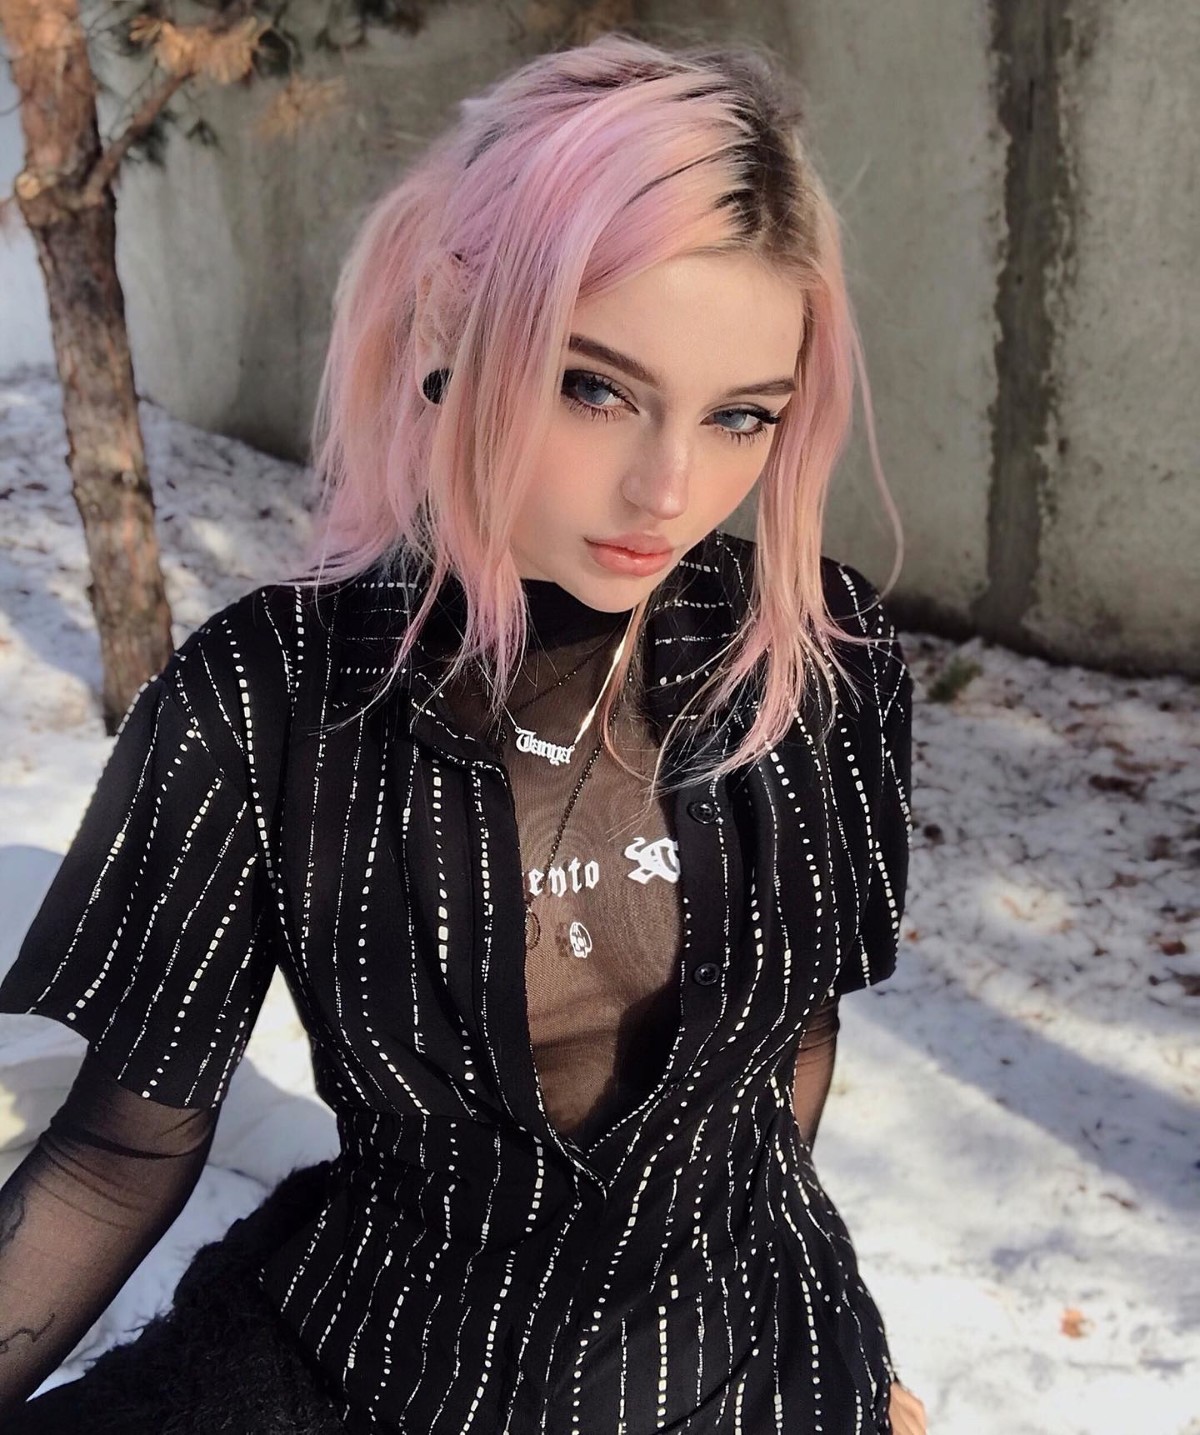 Women Model Dyed Hair Pink Hair Stretched Ears Black Clothing Blouse Lipstick Blue Eyes Young Woman  1200x1435